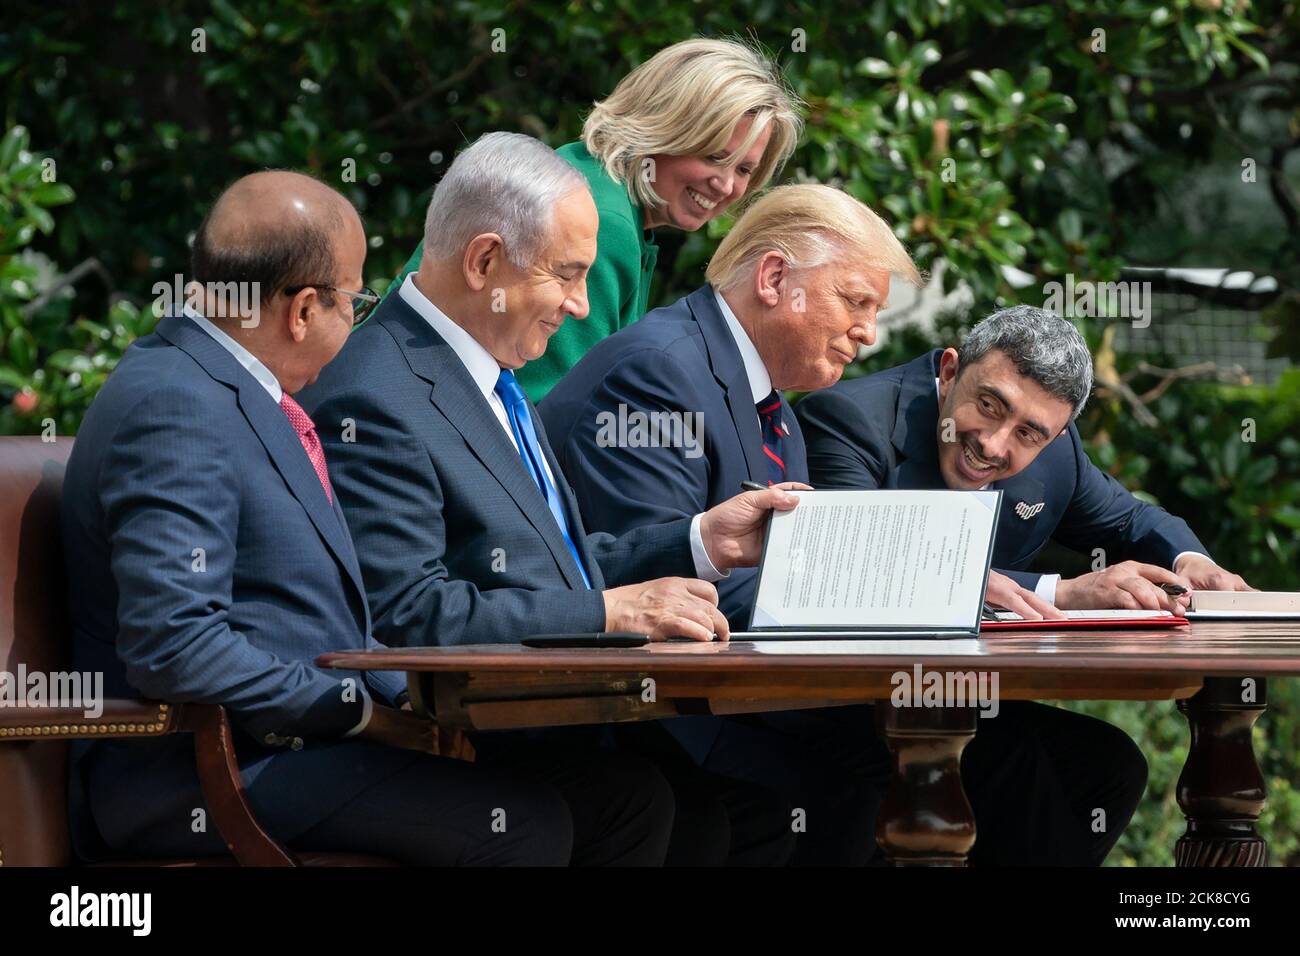 U.S. Chief of Protocol Cam Henderson assists President Donald J. Trump, Minister of Foreign Affairs of Bahrain Dr. Abdullatif bin Rashid Al-Zayani, Israeli Prime Minister Benjamin Netanyahu and Minister of Foreign Affairs for the United Arab Emirates Abdullah bin Zayed Al Nahyan with the documents during the signing of the Abraham Accords Tuesday, September 15, 2020, on the South Lawn of the White House. (USA) Stock Photo